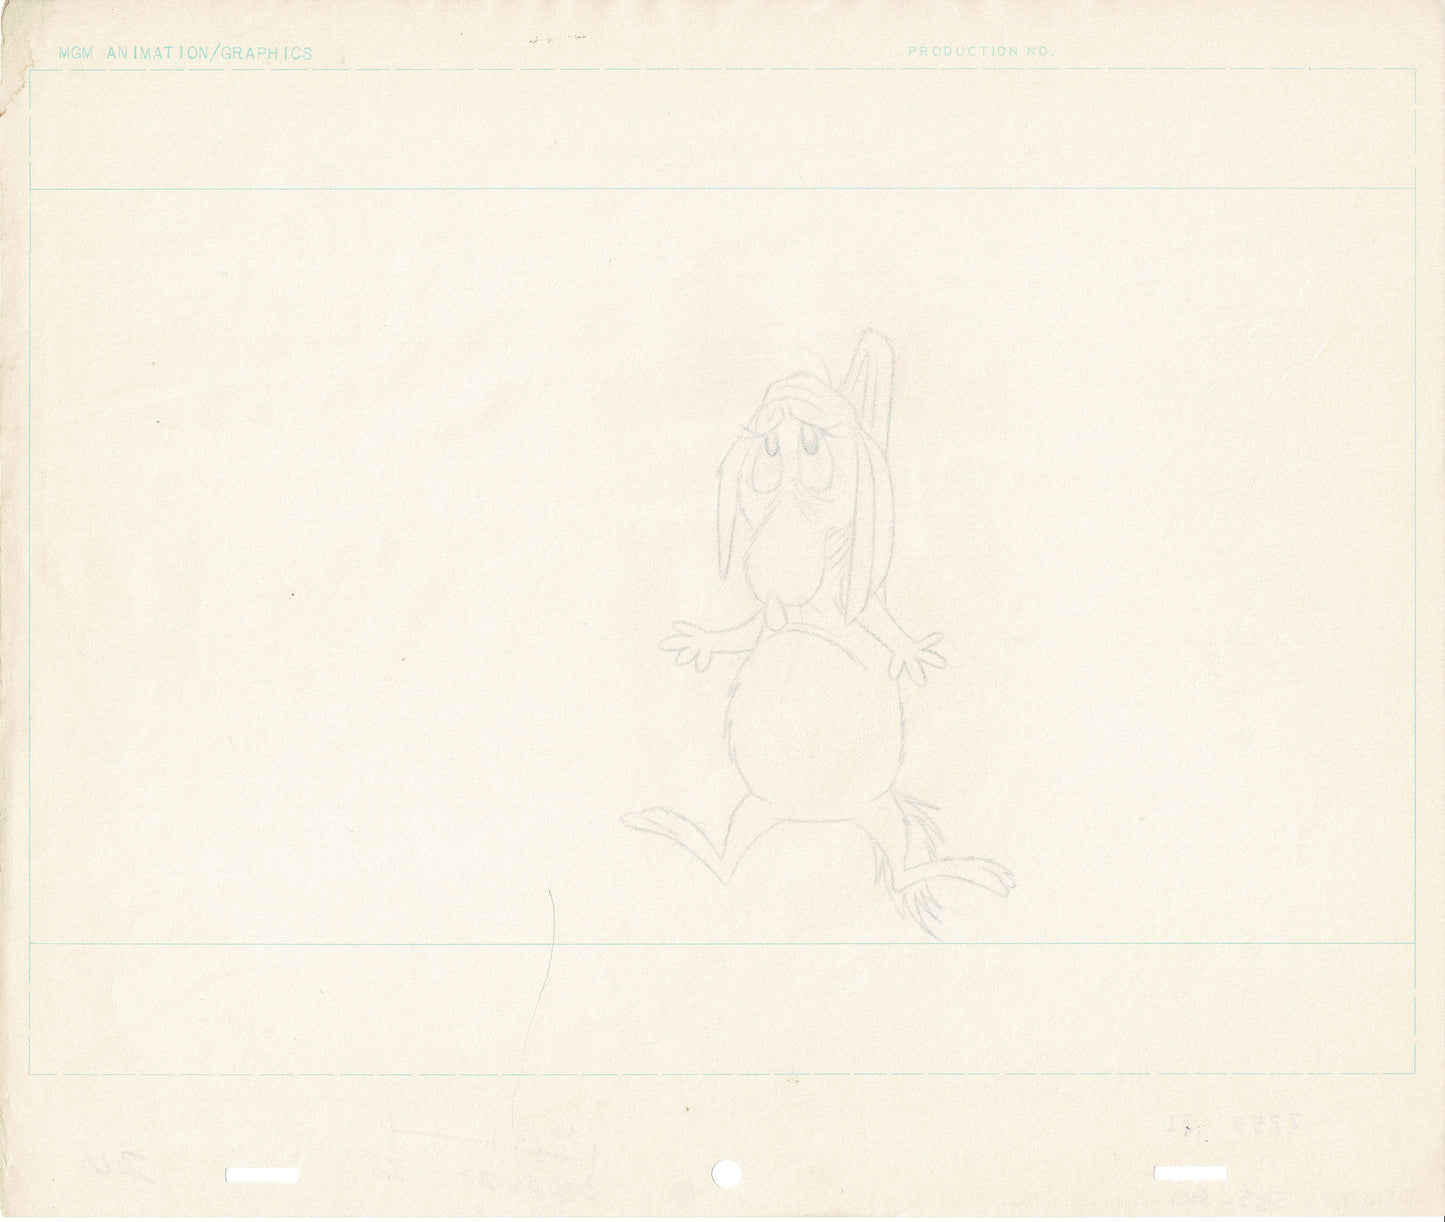 Chuck Jones How The Grinch Stole Christmas KEY Animation Production Drawing of Max the Dog from Dr Seuss 1966